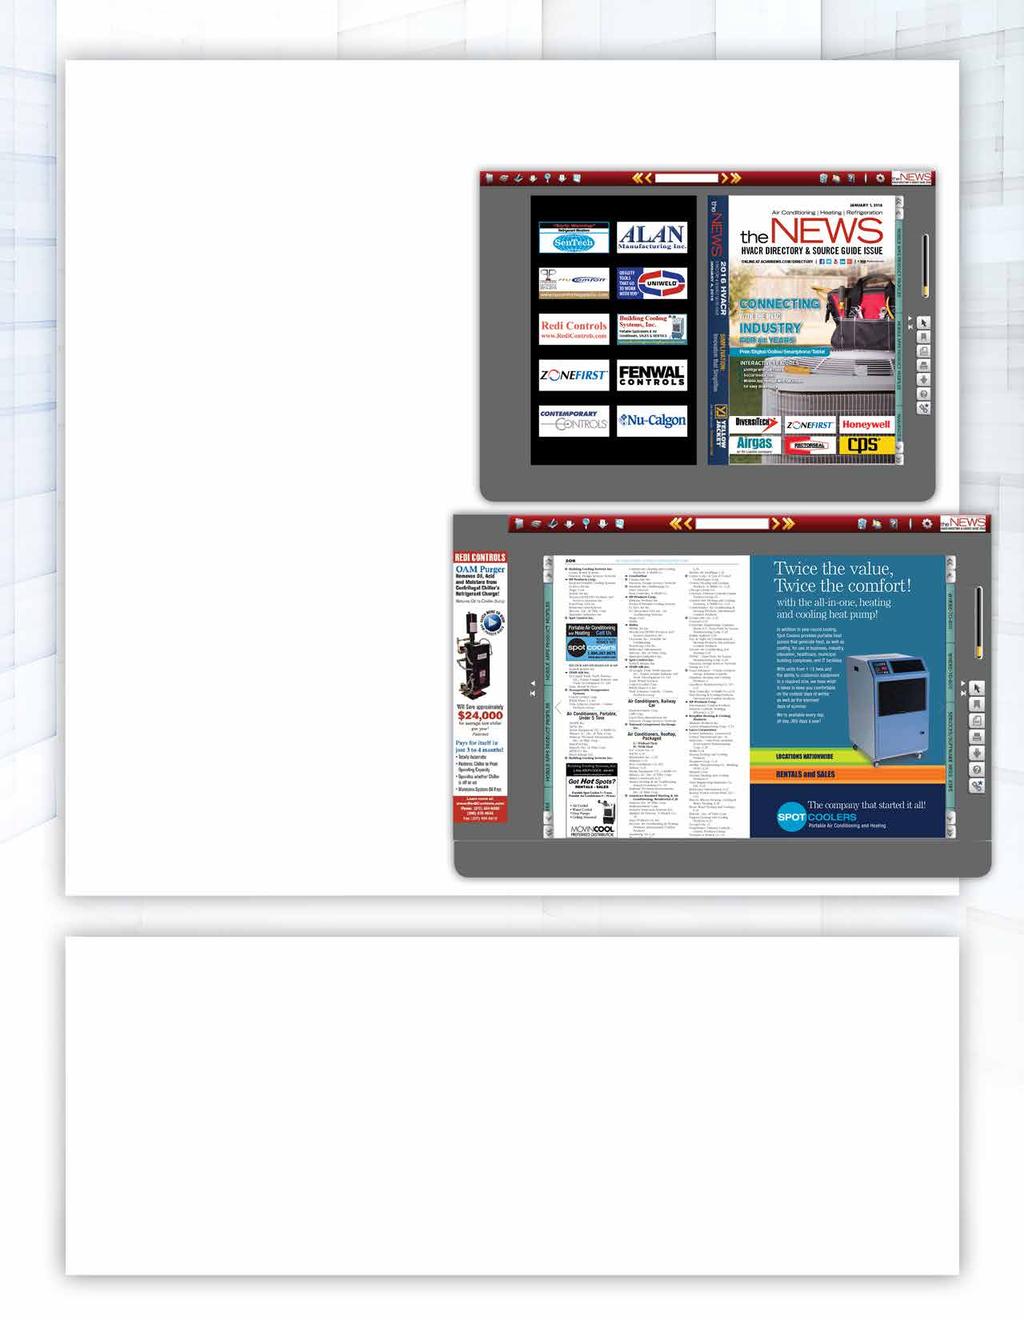 Digital Edition Sponsor Opportunities An exact replica of the print issue with live links and tracking!